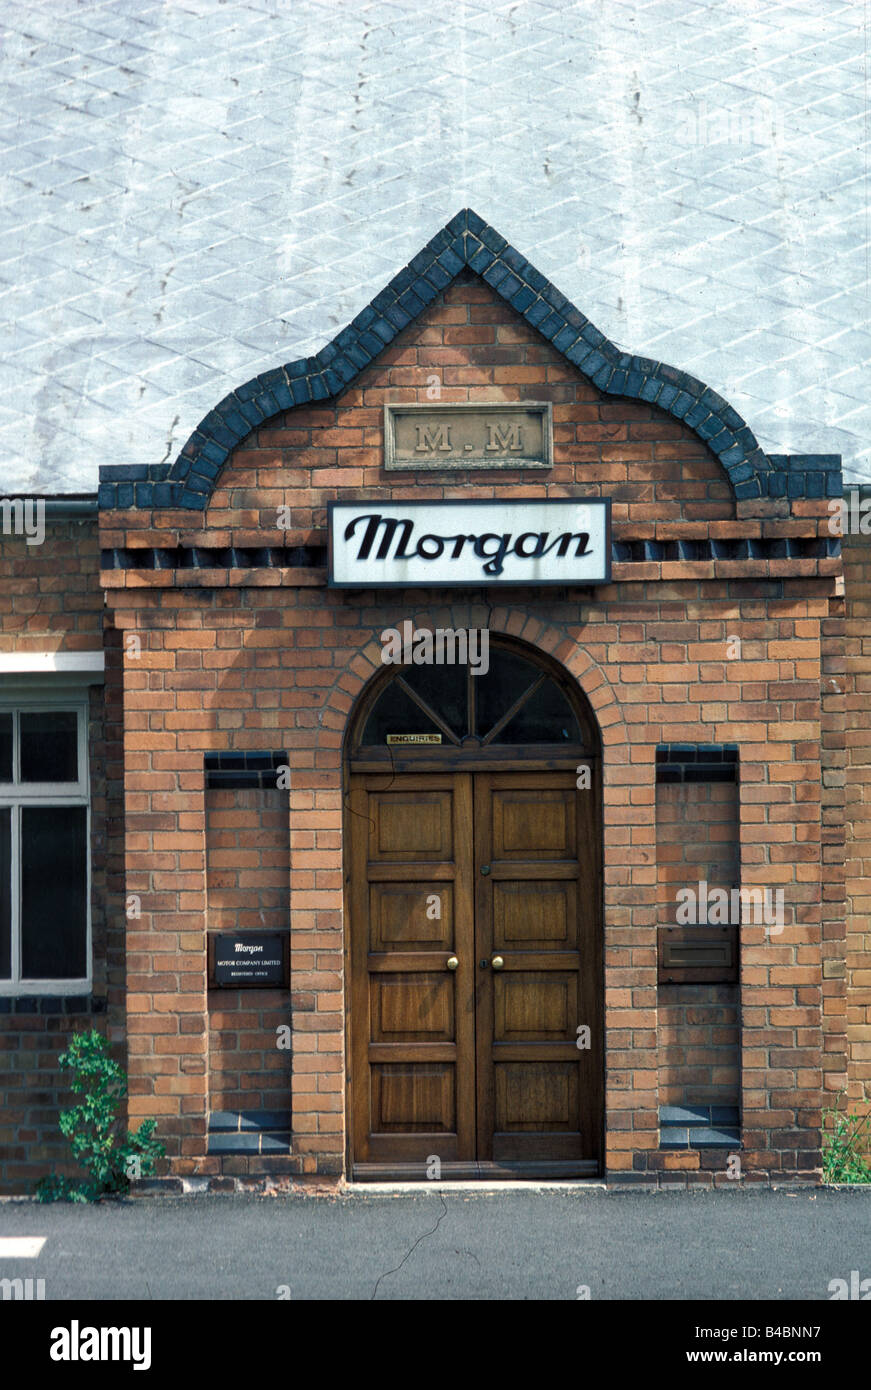 Car, Production, Production with Morgan, manufacturing premises, Entrance hall Stock Photo